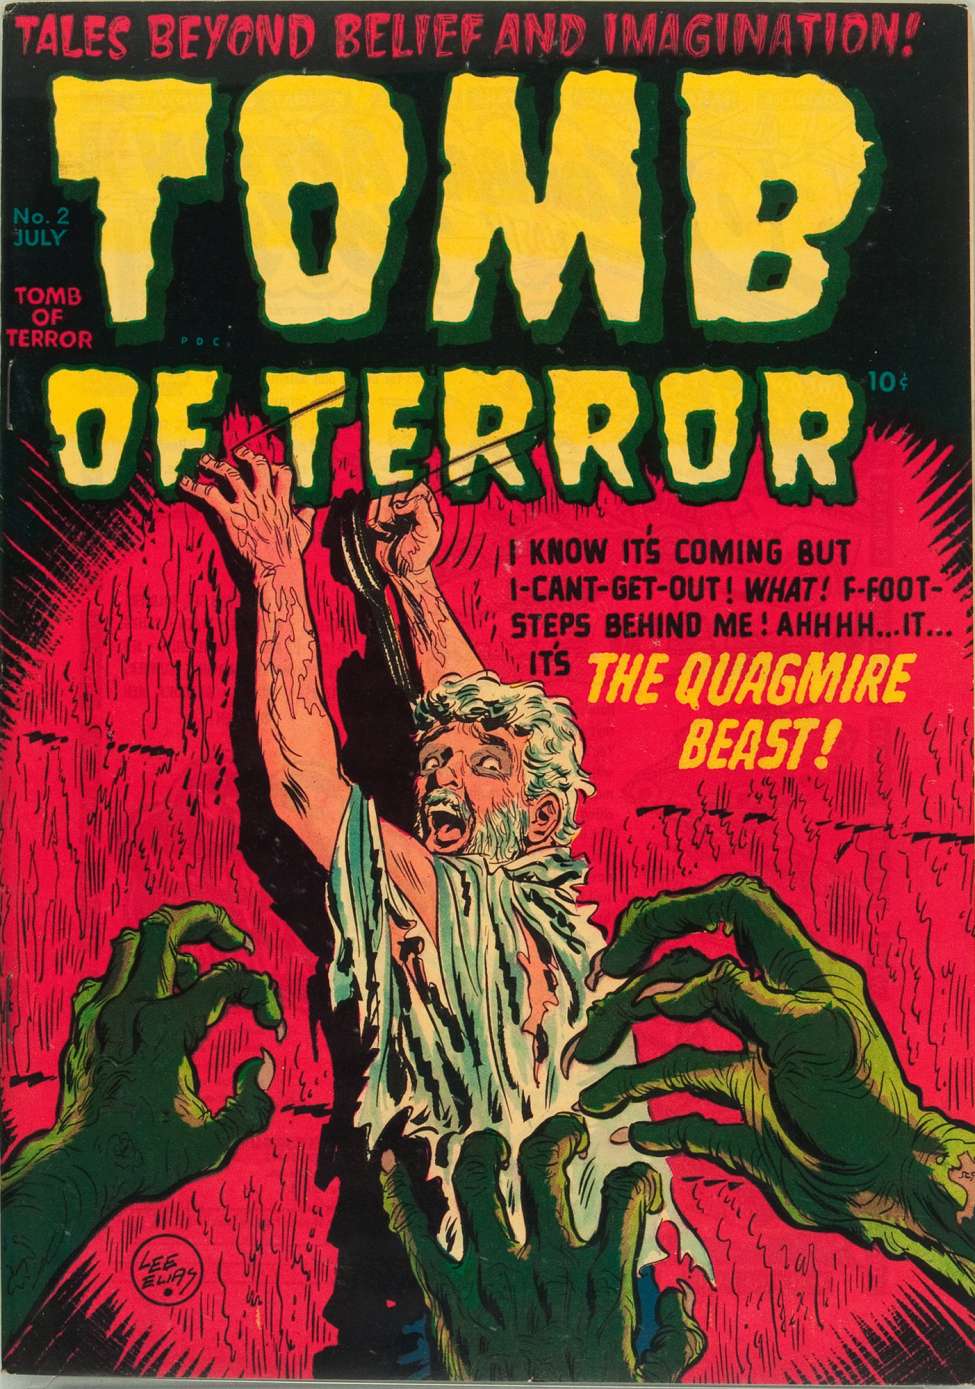 Comic Book Cover For Tomb of Terror 2 (alt) - Version 2